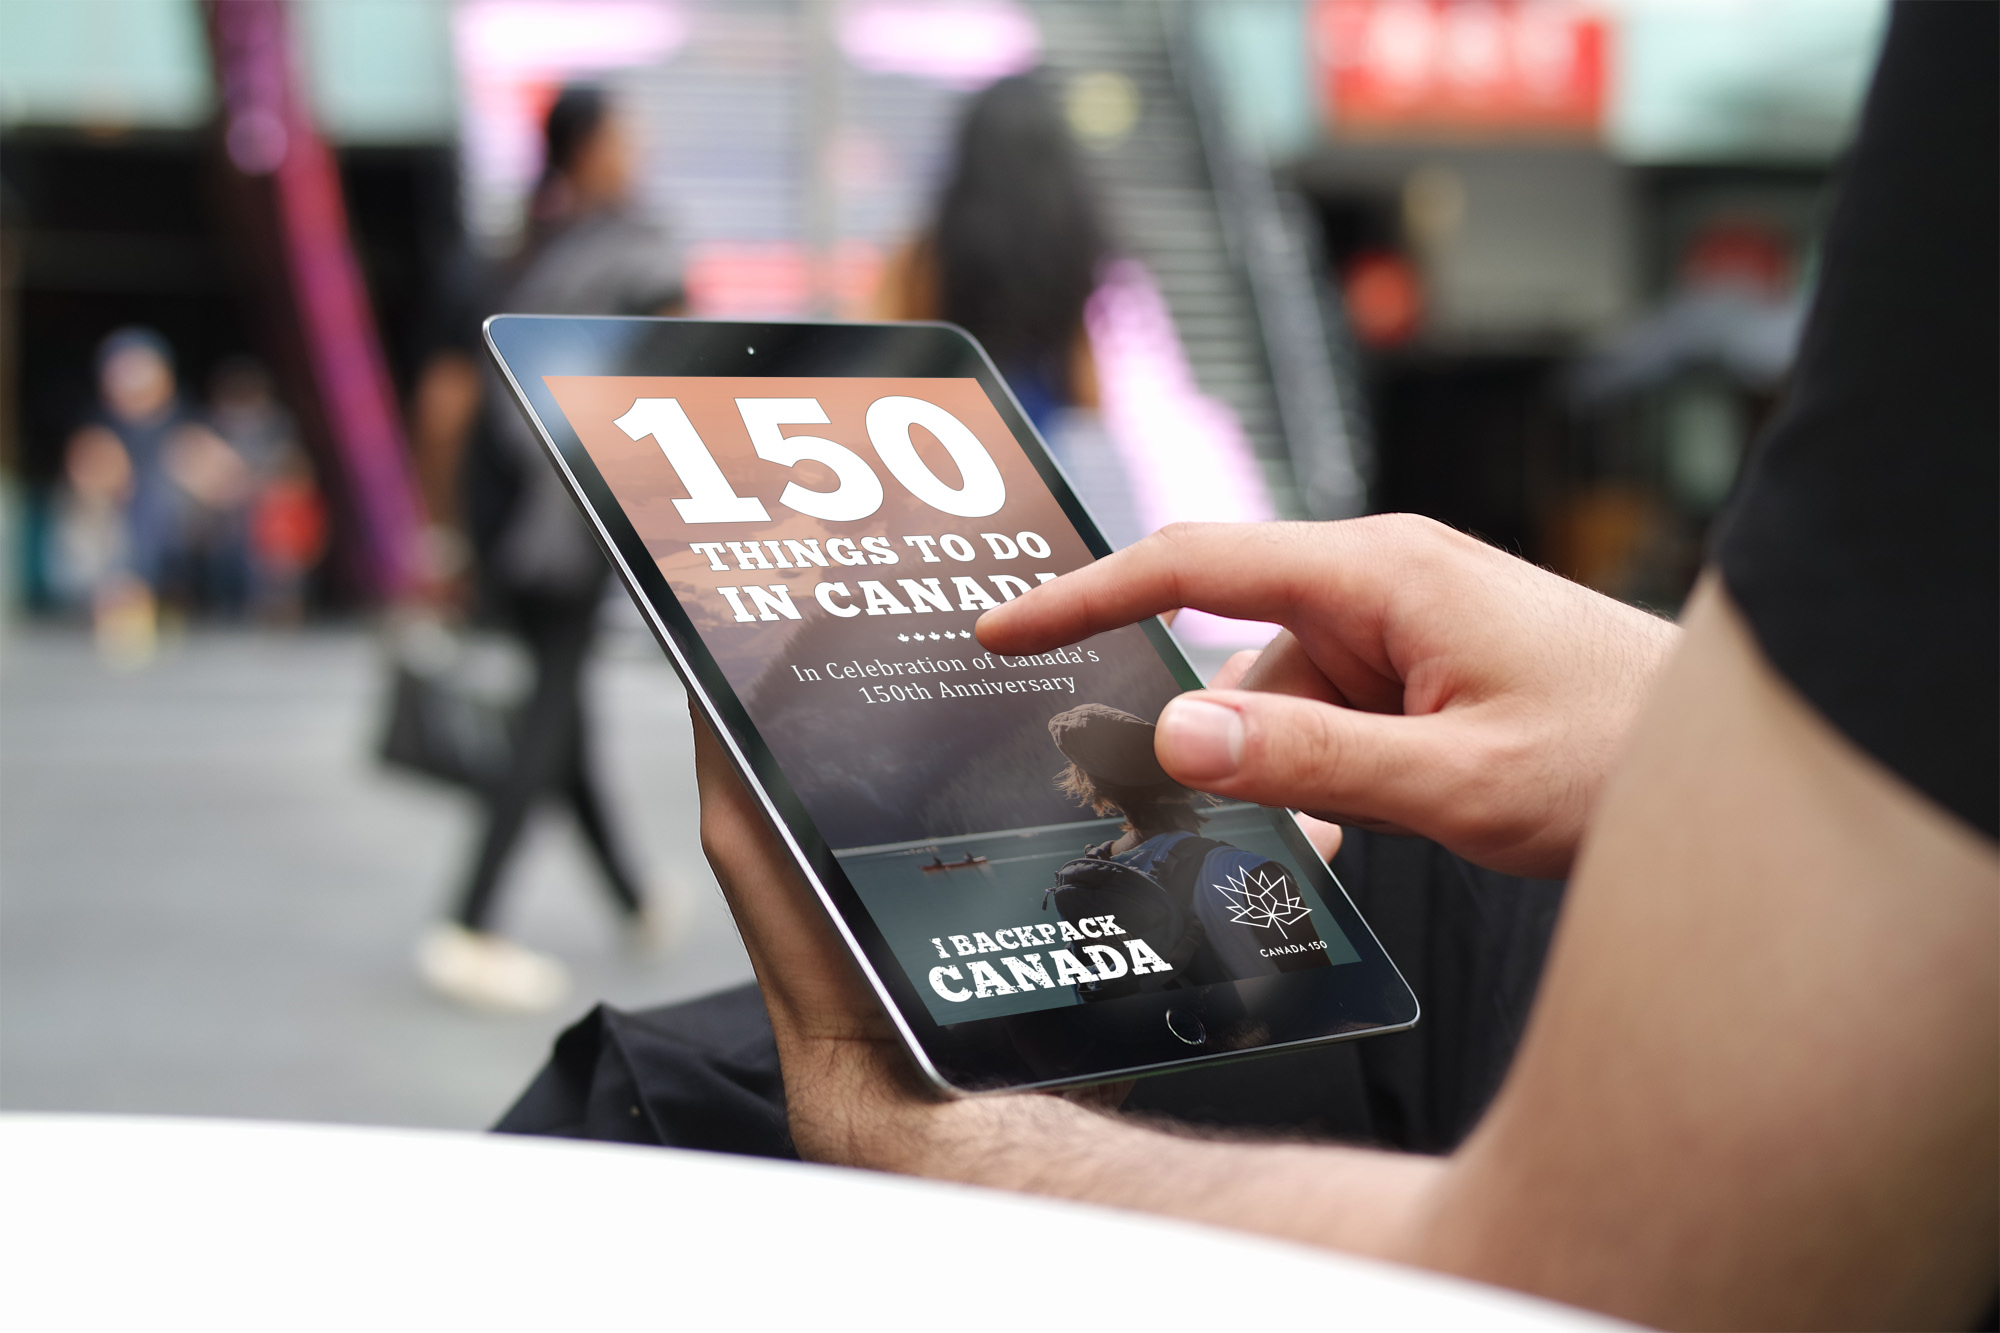 150 Things To Do In Canada – The eBook!